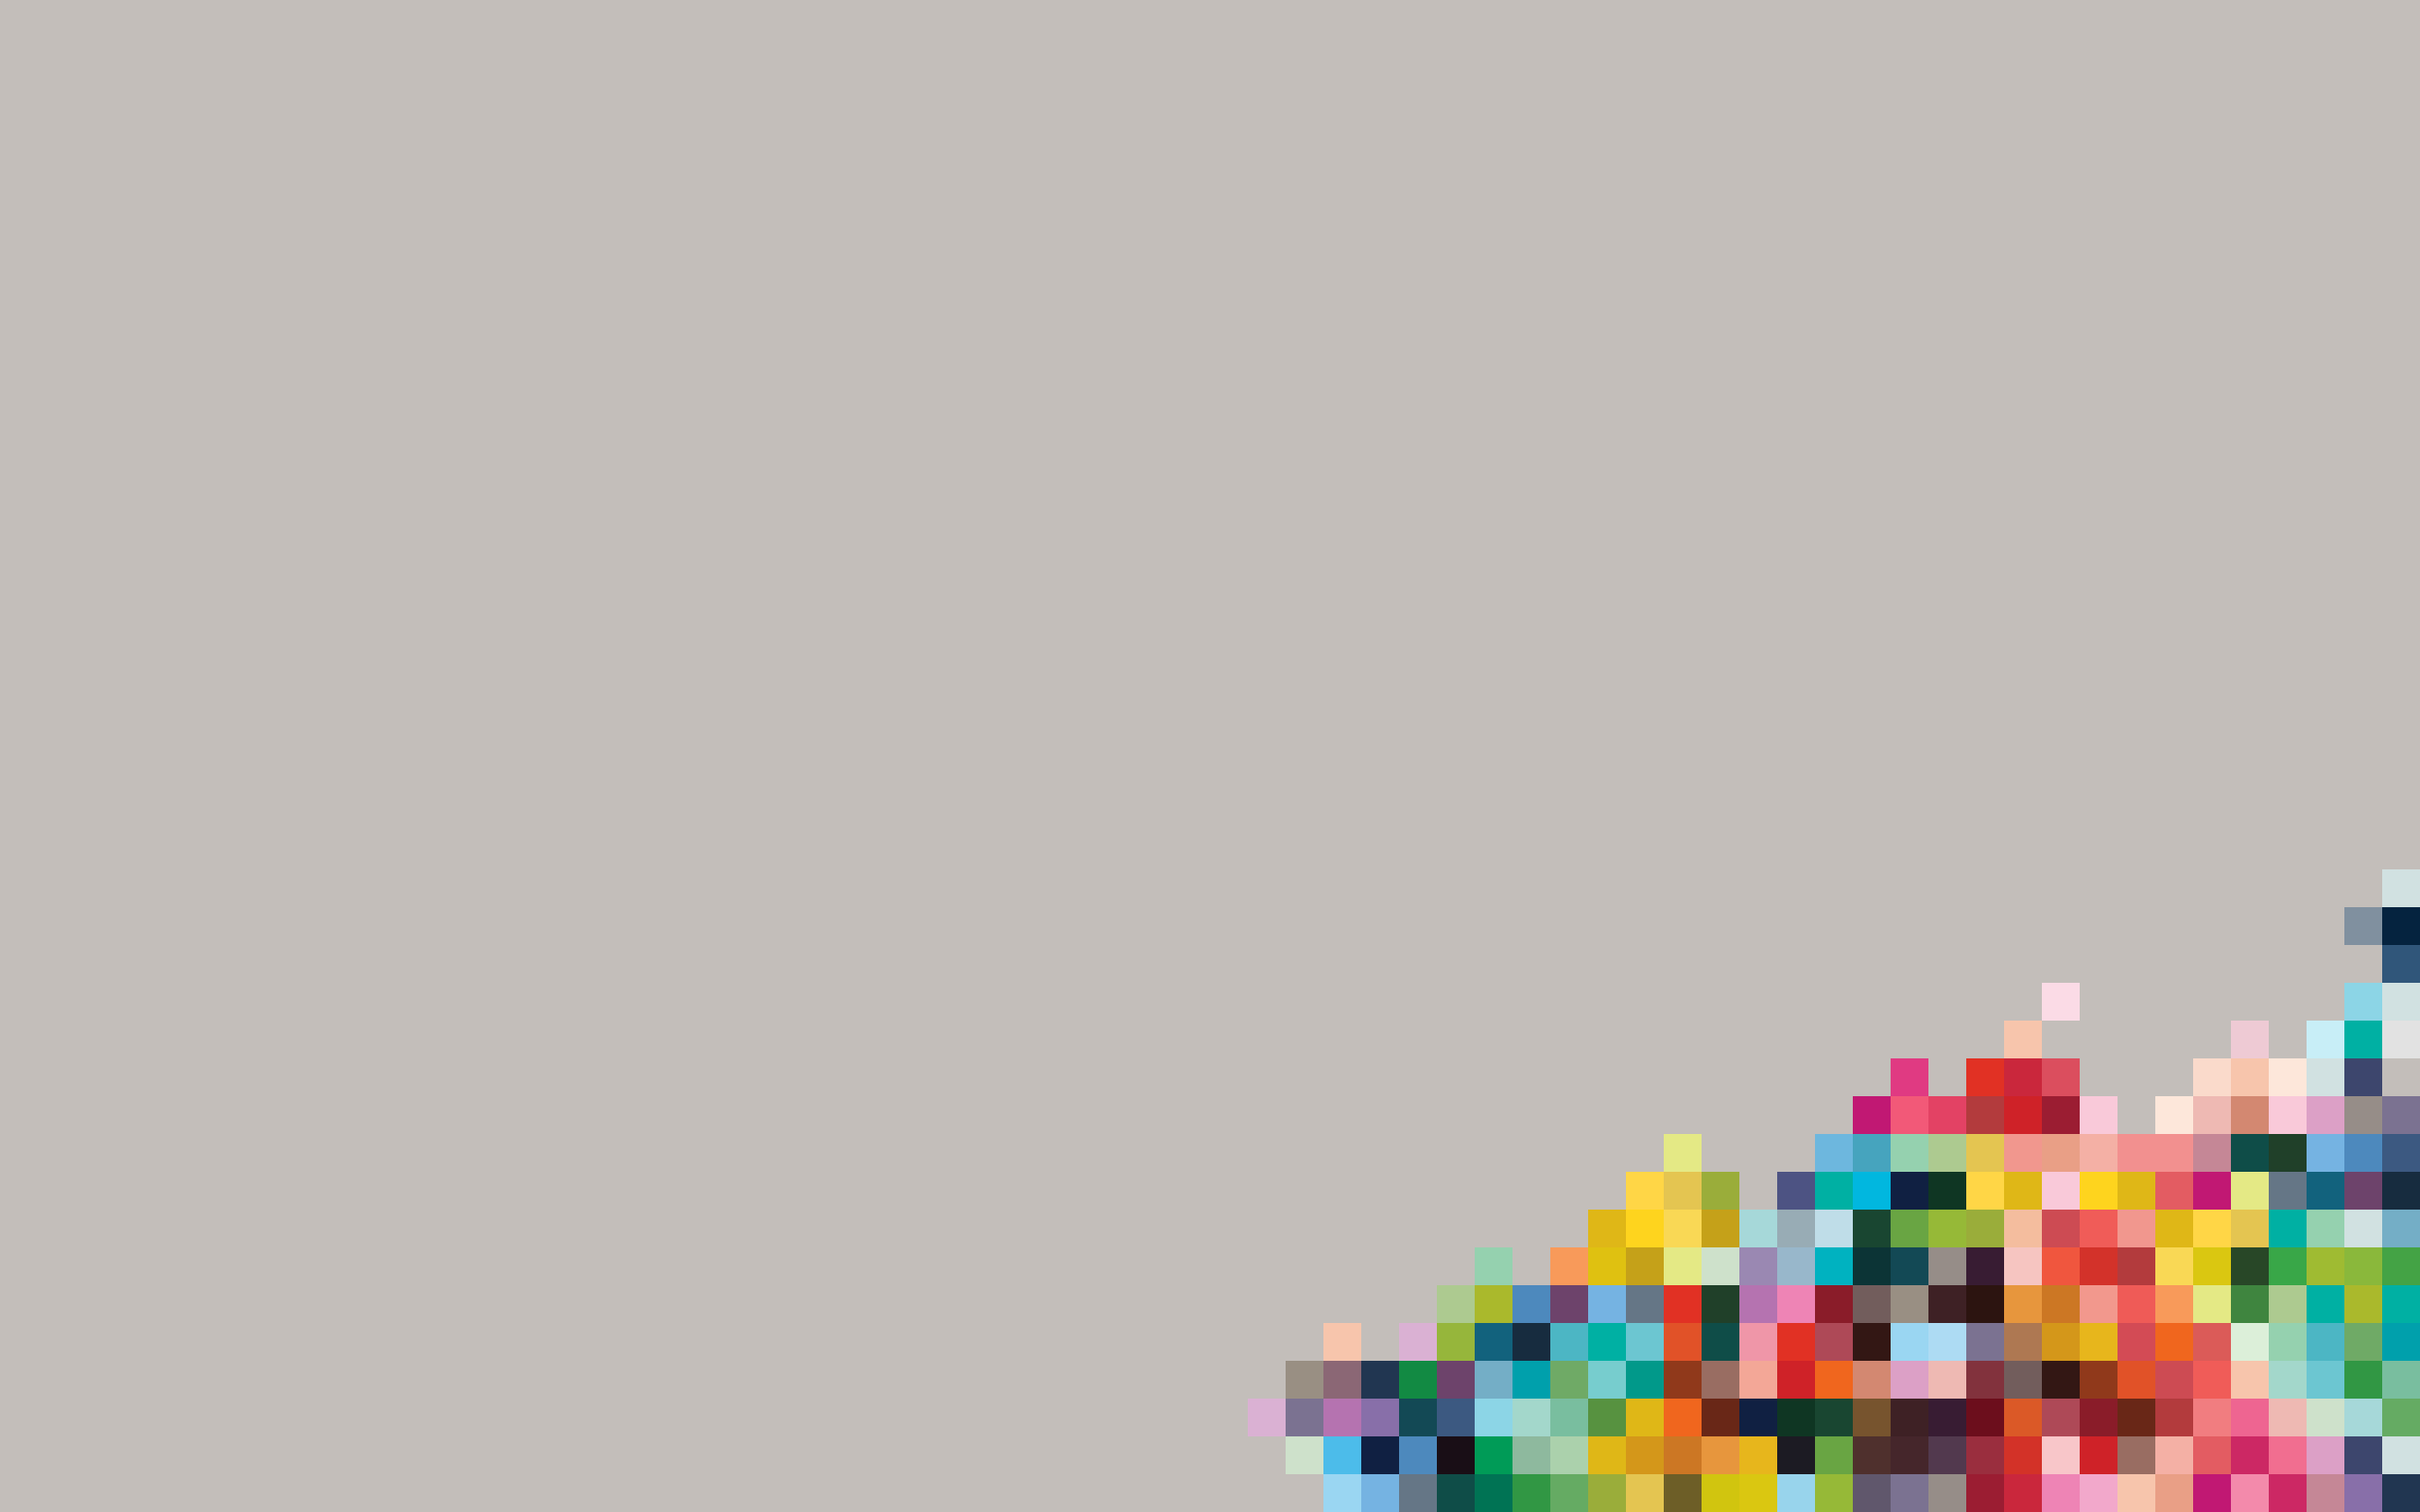 2560x1600 My colorful pixel desktop wallpaper - Another House Blog